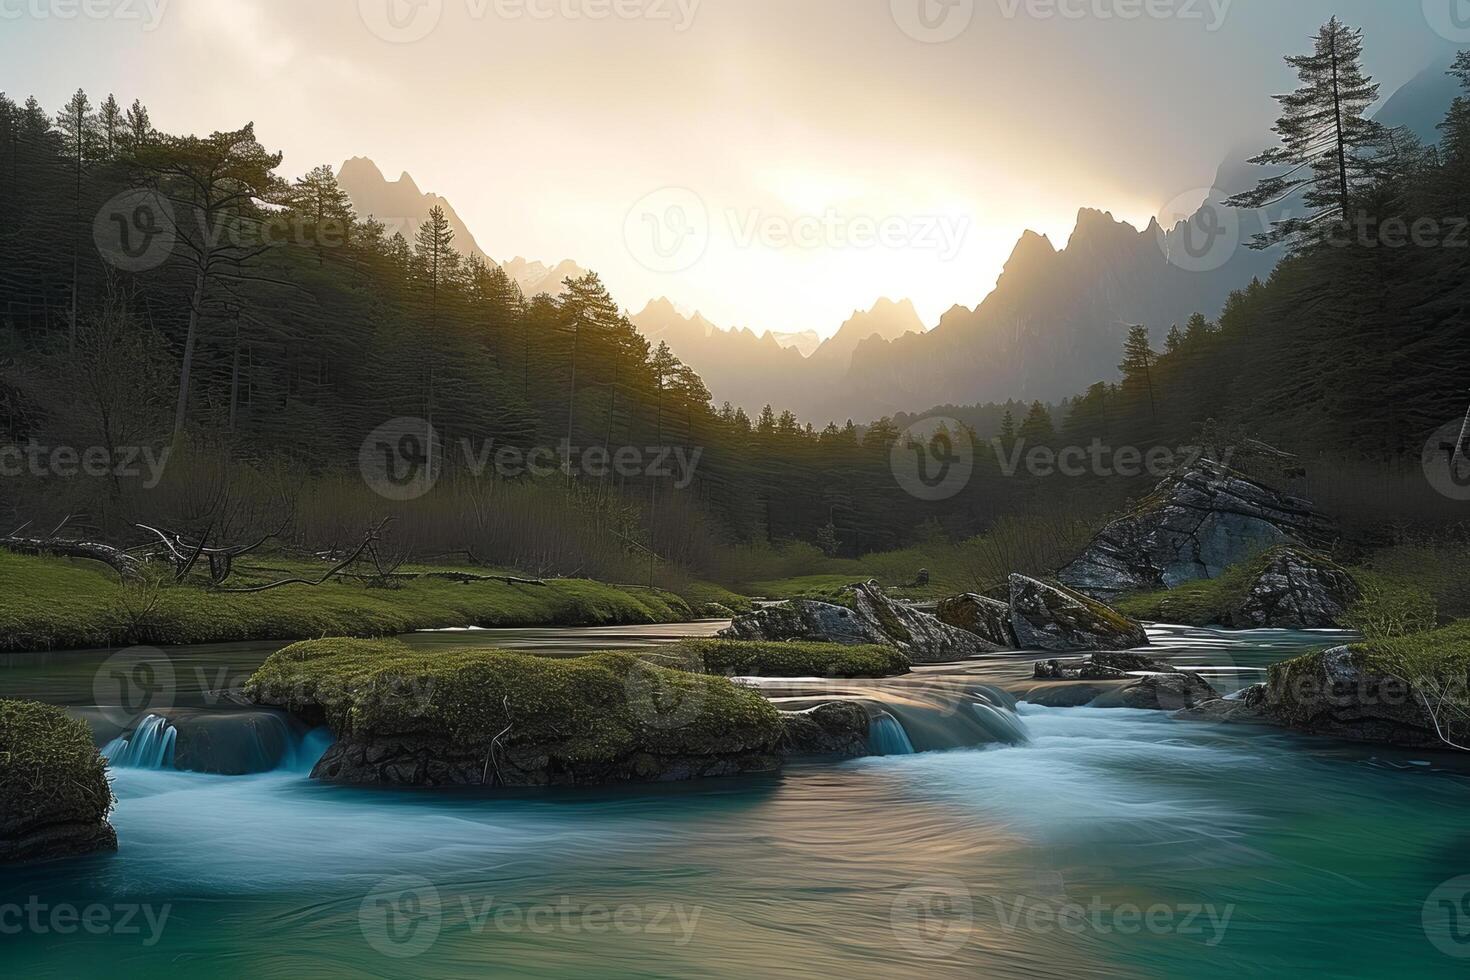 AI generated River rapids surrounded by northern forest and mountains at morning 3D render. Beautiful nature landscape, scenic outdoor background, serenity and calmness photo